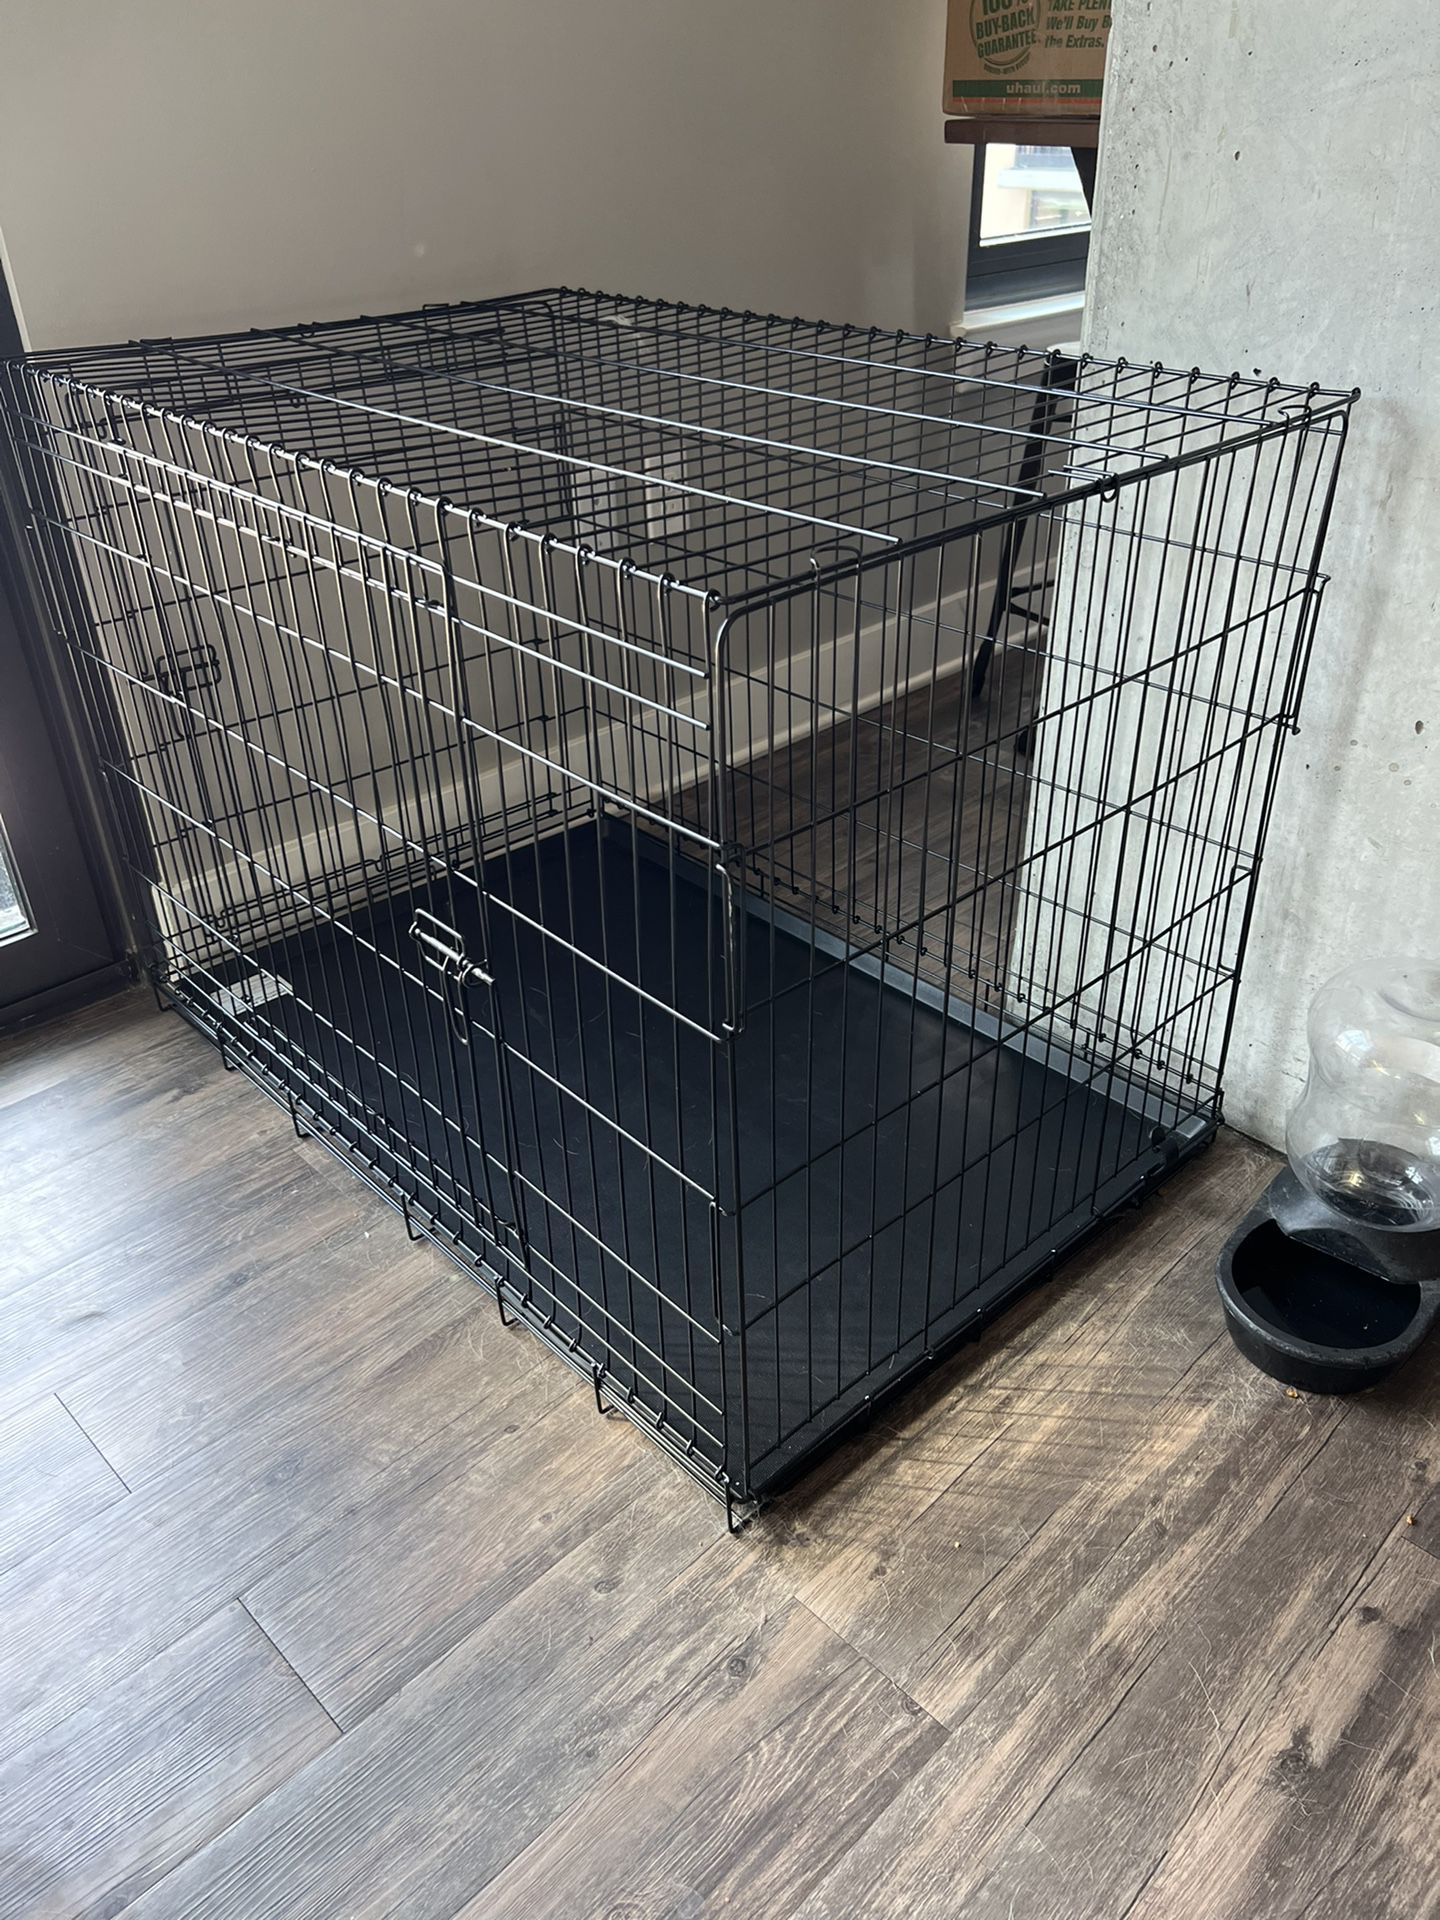 X-Large Dog Crate “42 With Double Door (Foldable)